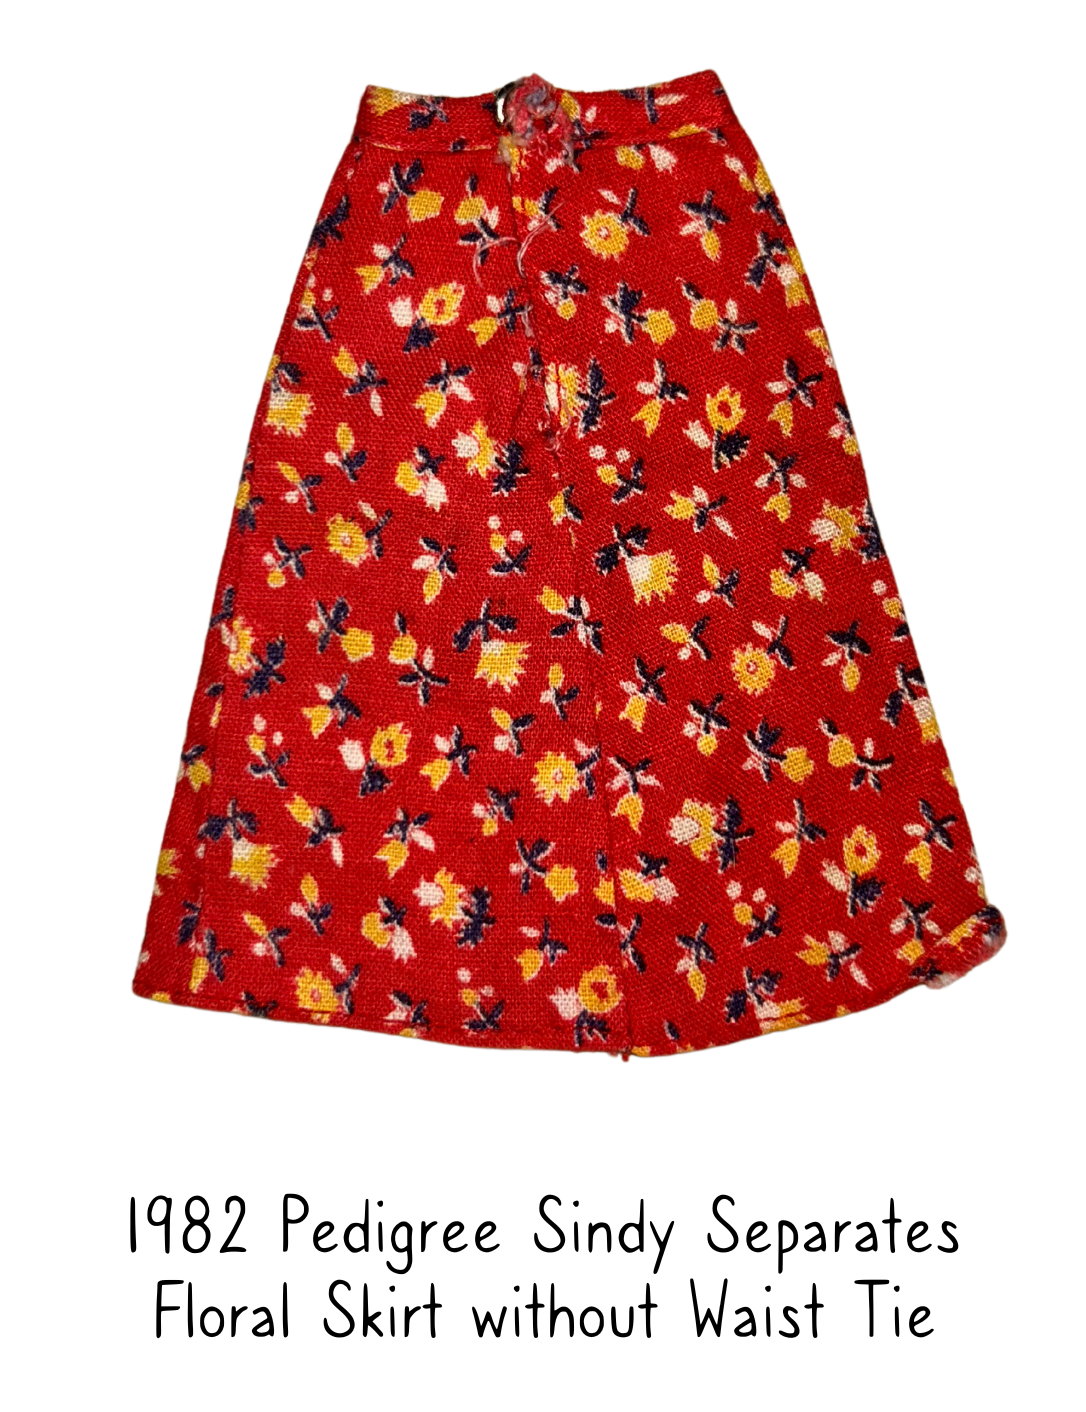 1982 Pedigree Sindy Doll Separates Floral Skirt without Waist Tie